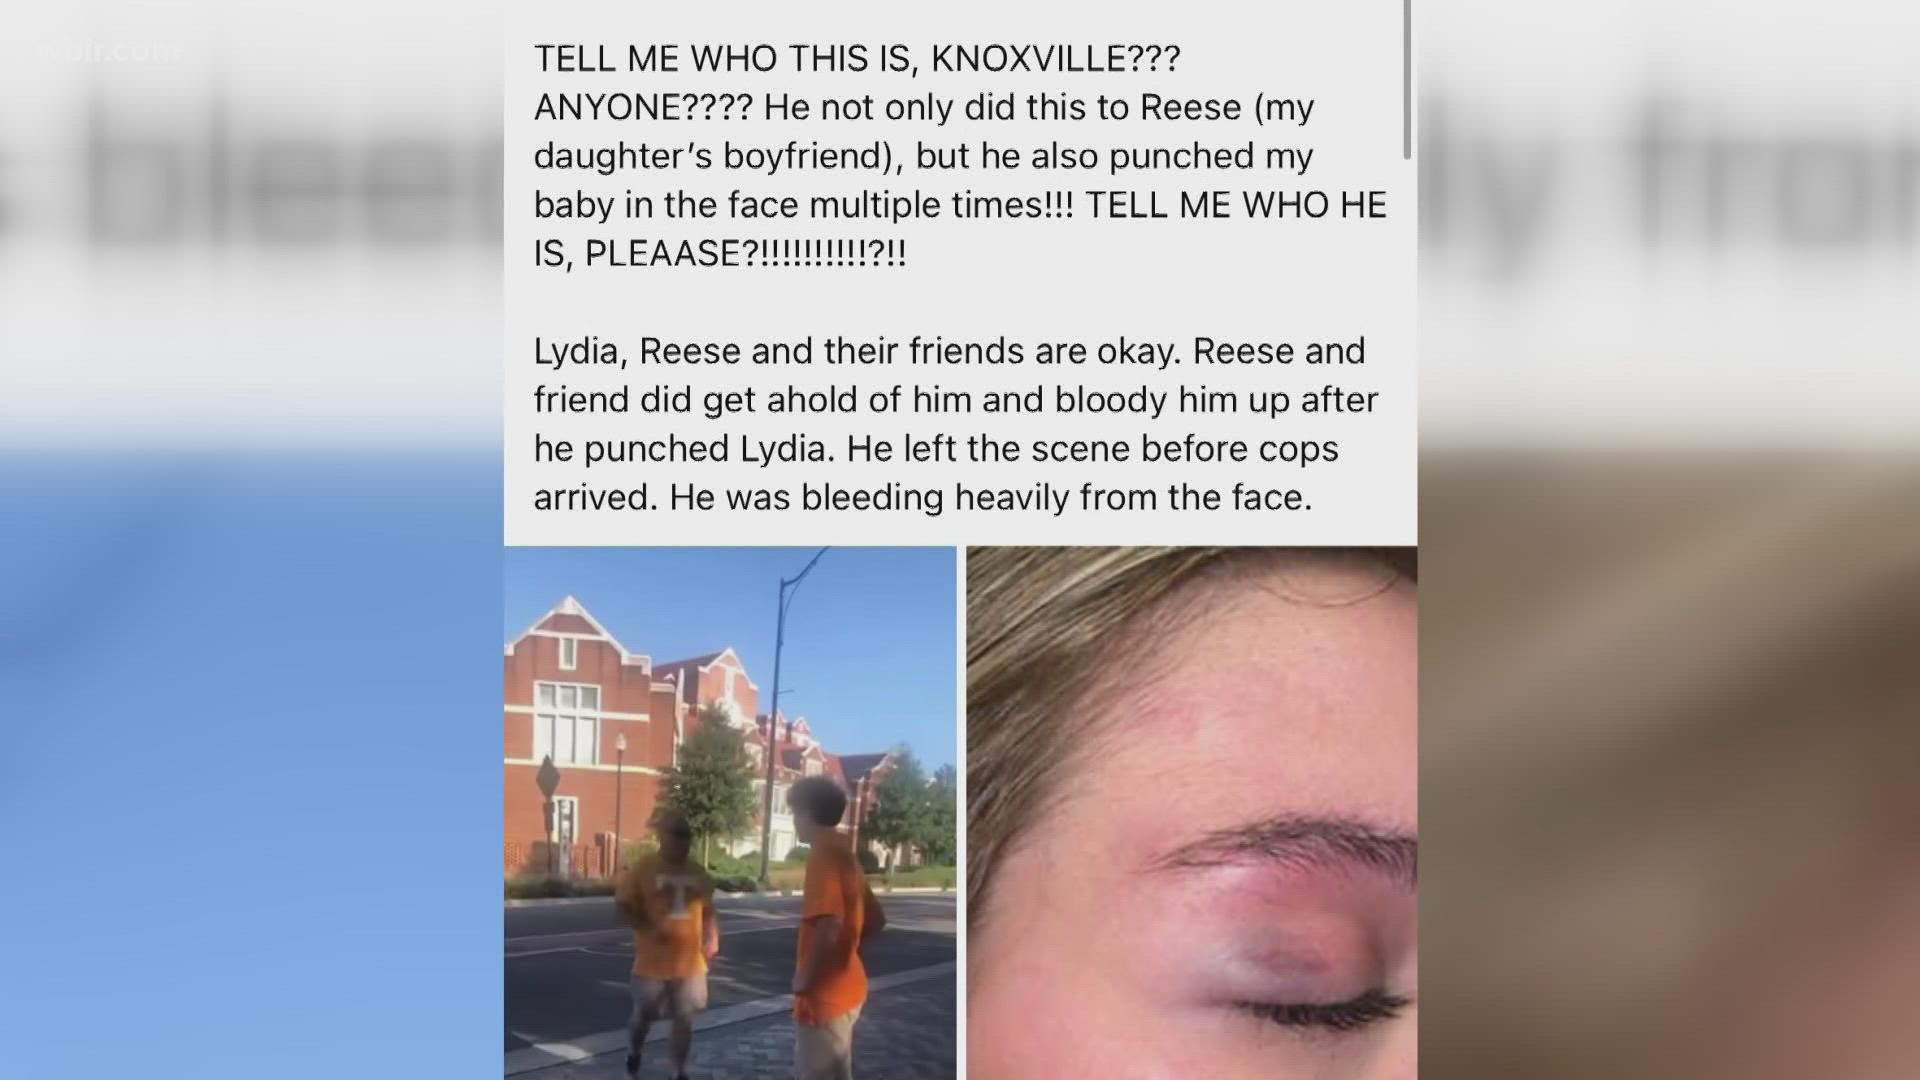 The man is accused of hitting a UT student in the face after last weekend's football game.